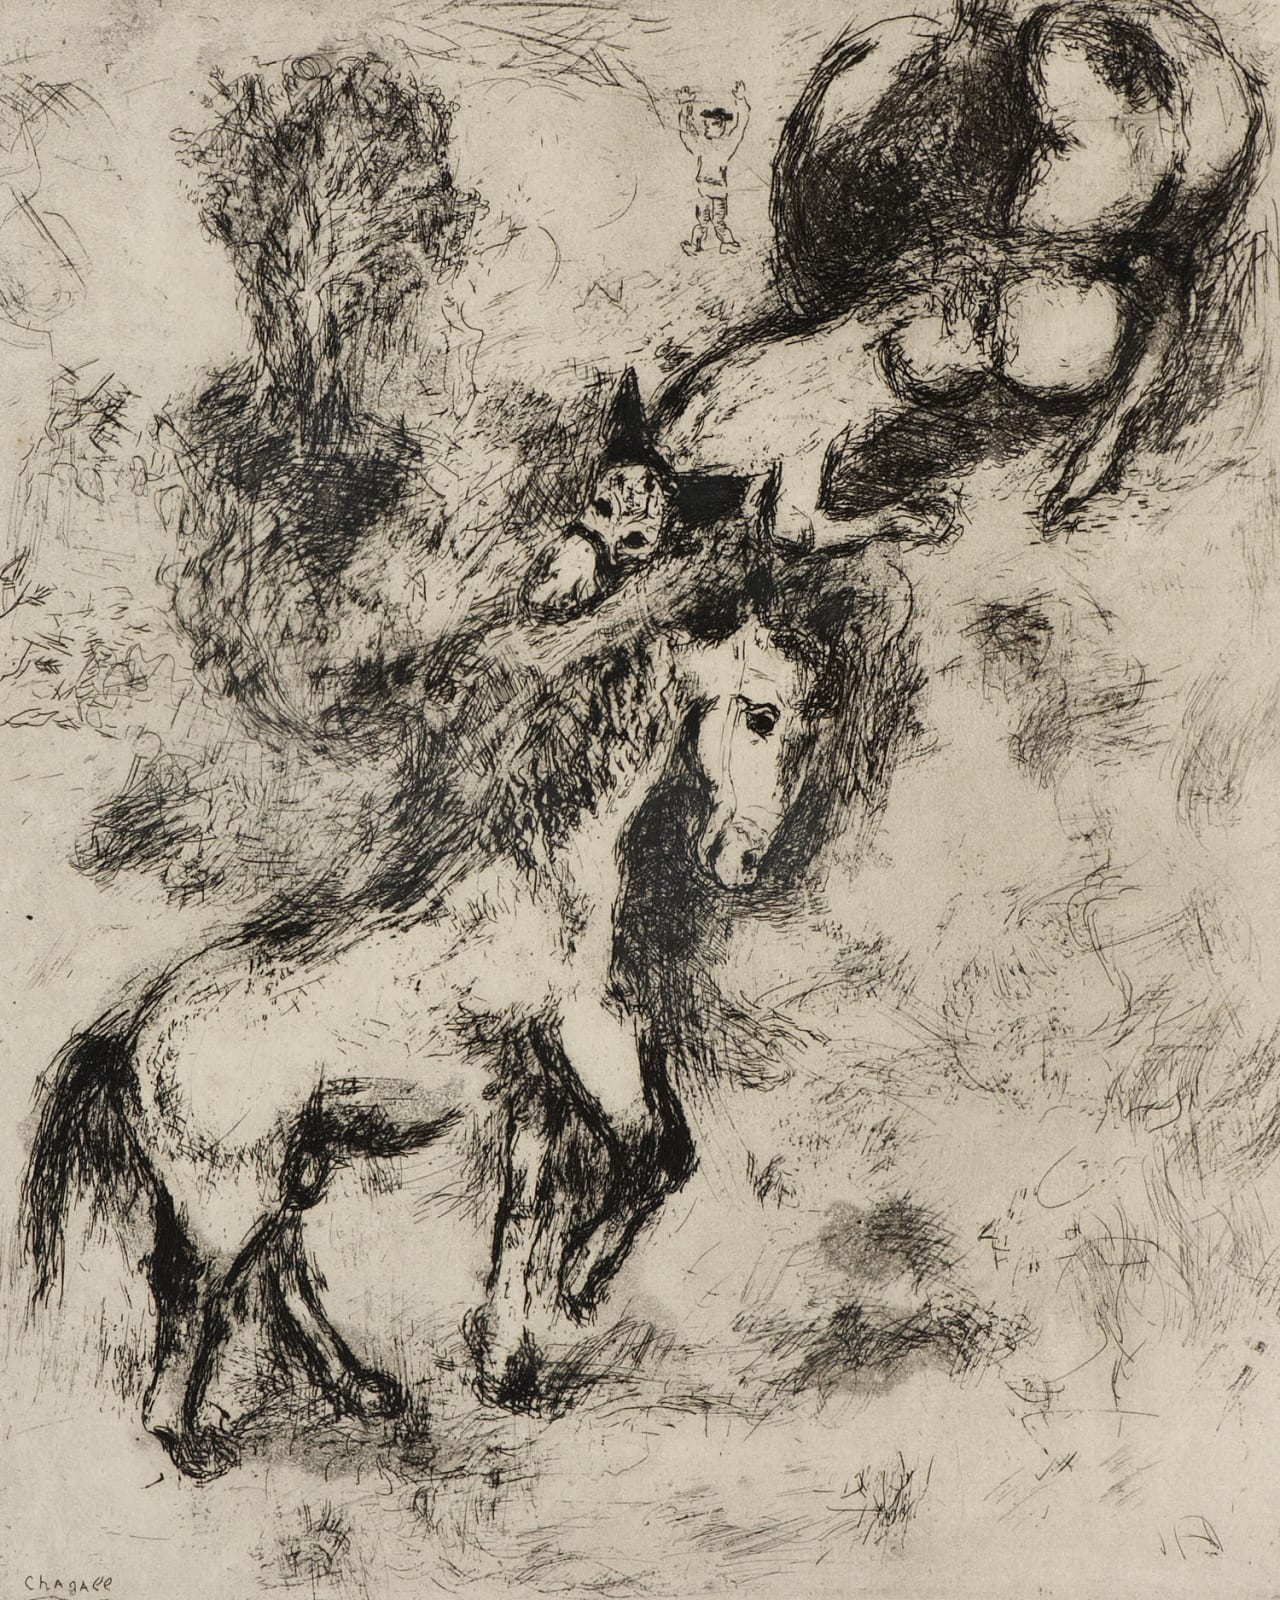 Marc Chagall (1887-1985) Le cheval et l'âne (The Horse and the Donkey) 1952 Etching on Montval paper 29.5 x 23.5 cm Ben Uri Collection © Marc Chagall estate To see and discover more about this artist click here